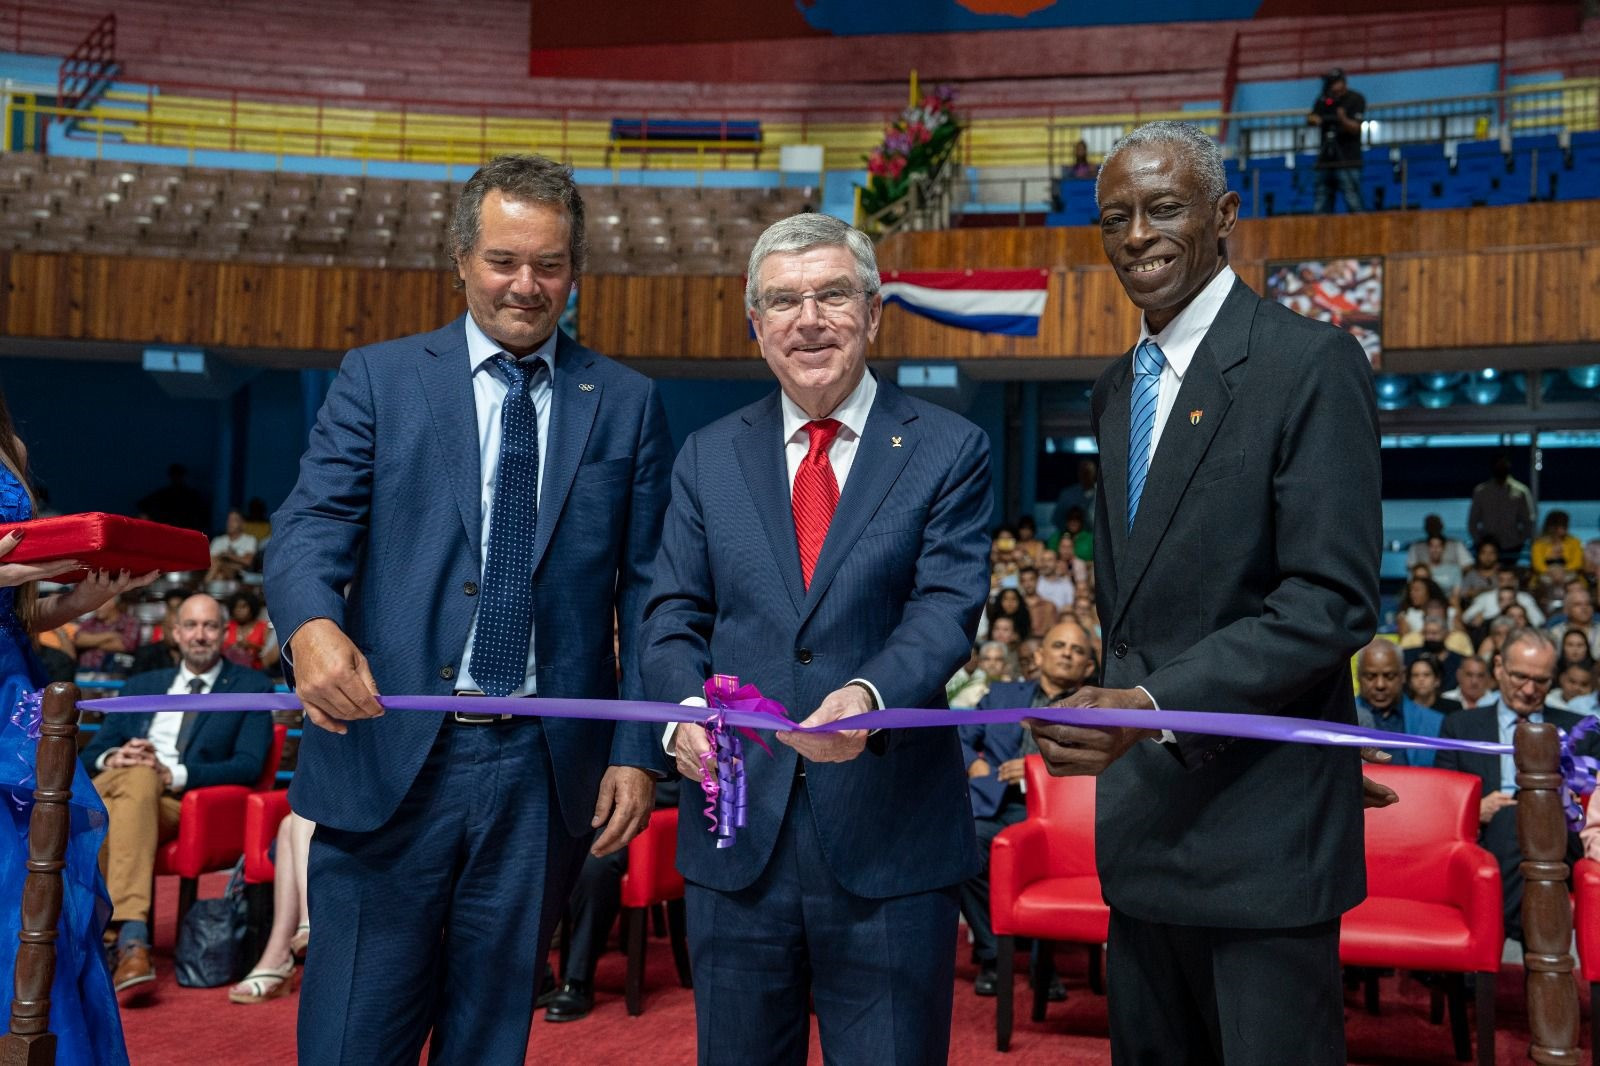 IOC President Thomas Bach, centre, cut the ribbon to mark the opening of a multi-purpose court at the Ciudad Deportiva Coliseum alongside Cuban OIympic Committee leader Roberto Leon Richards, right, and Panam Sports President Neven Ilic, left ©Panam Sports